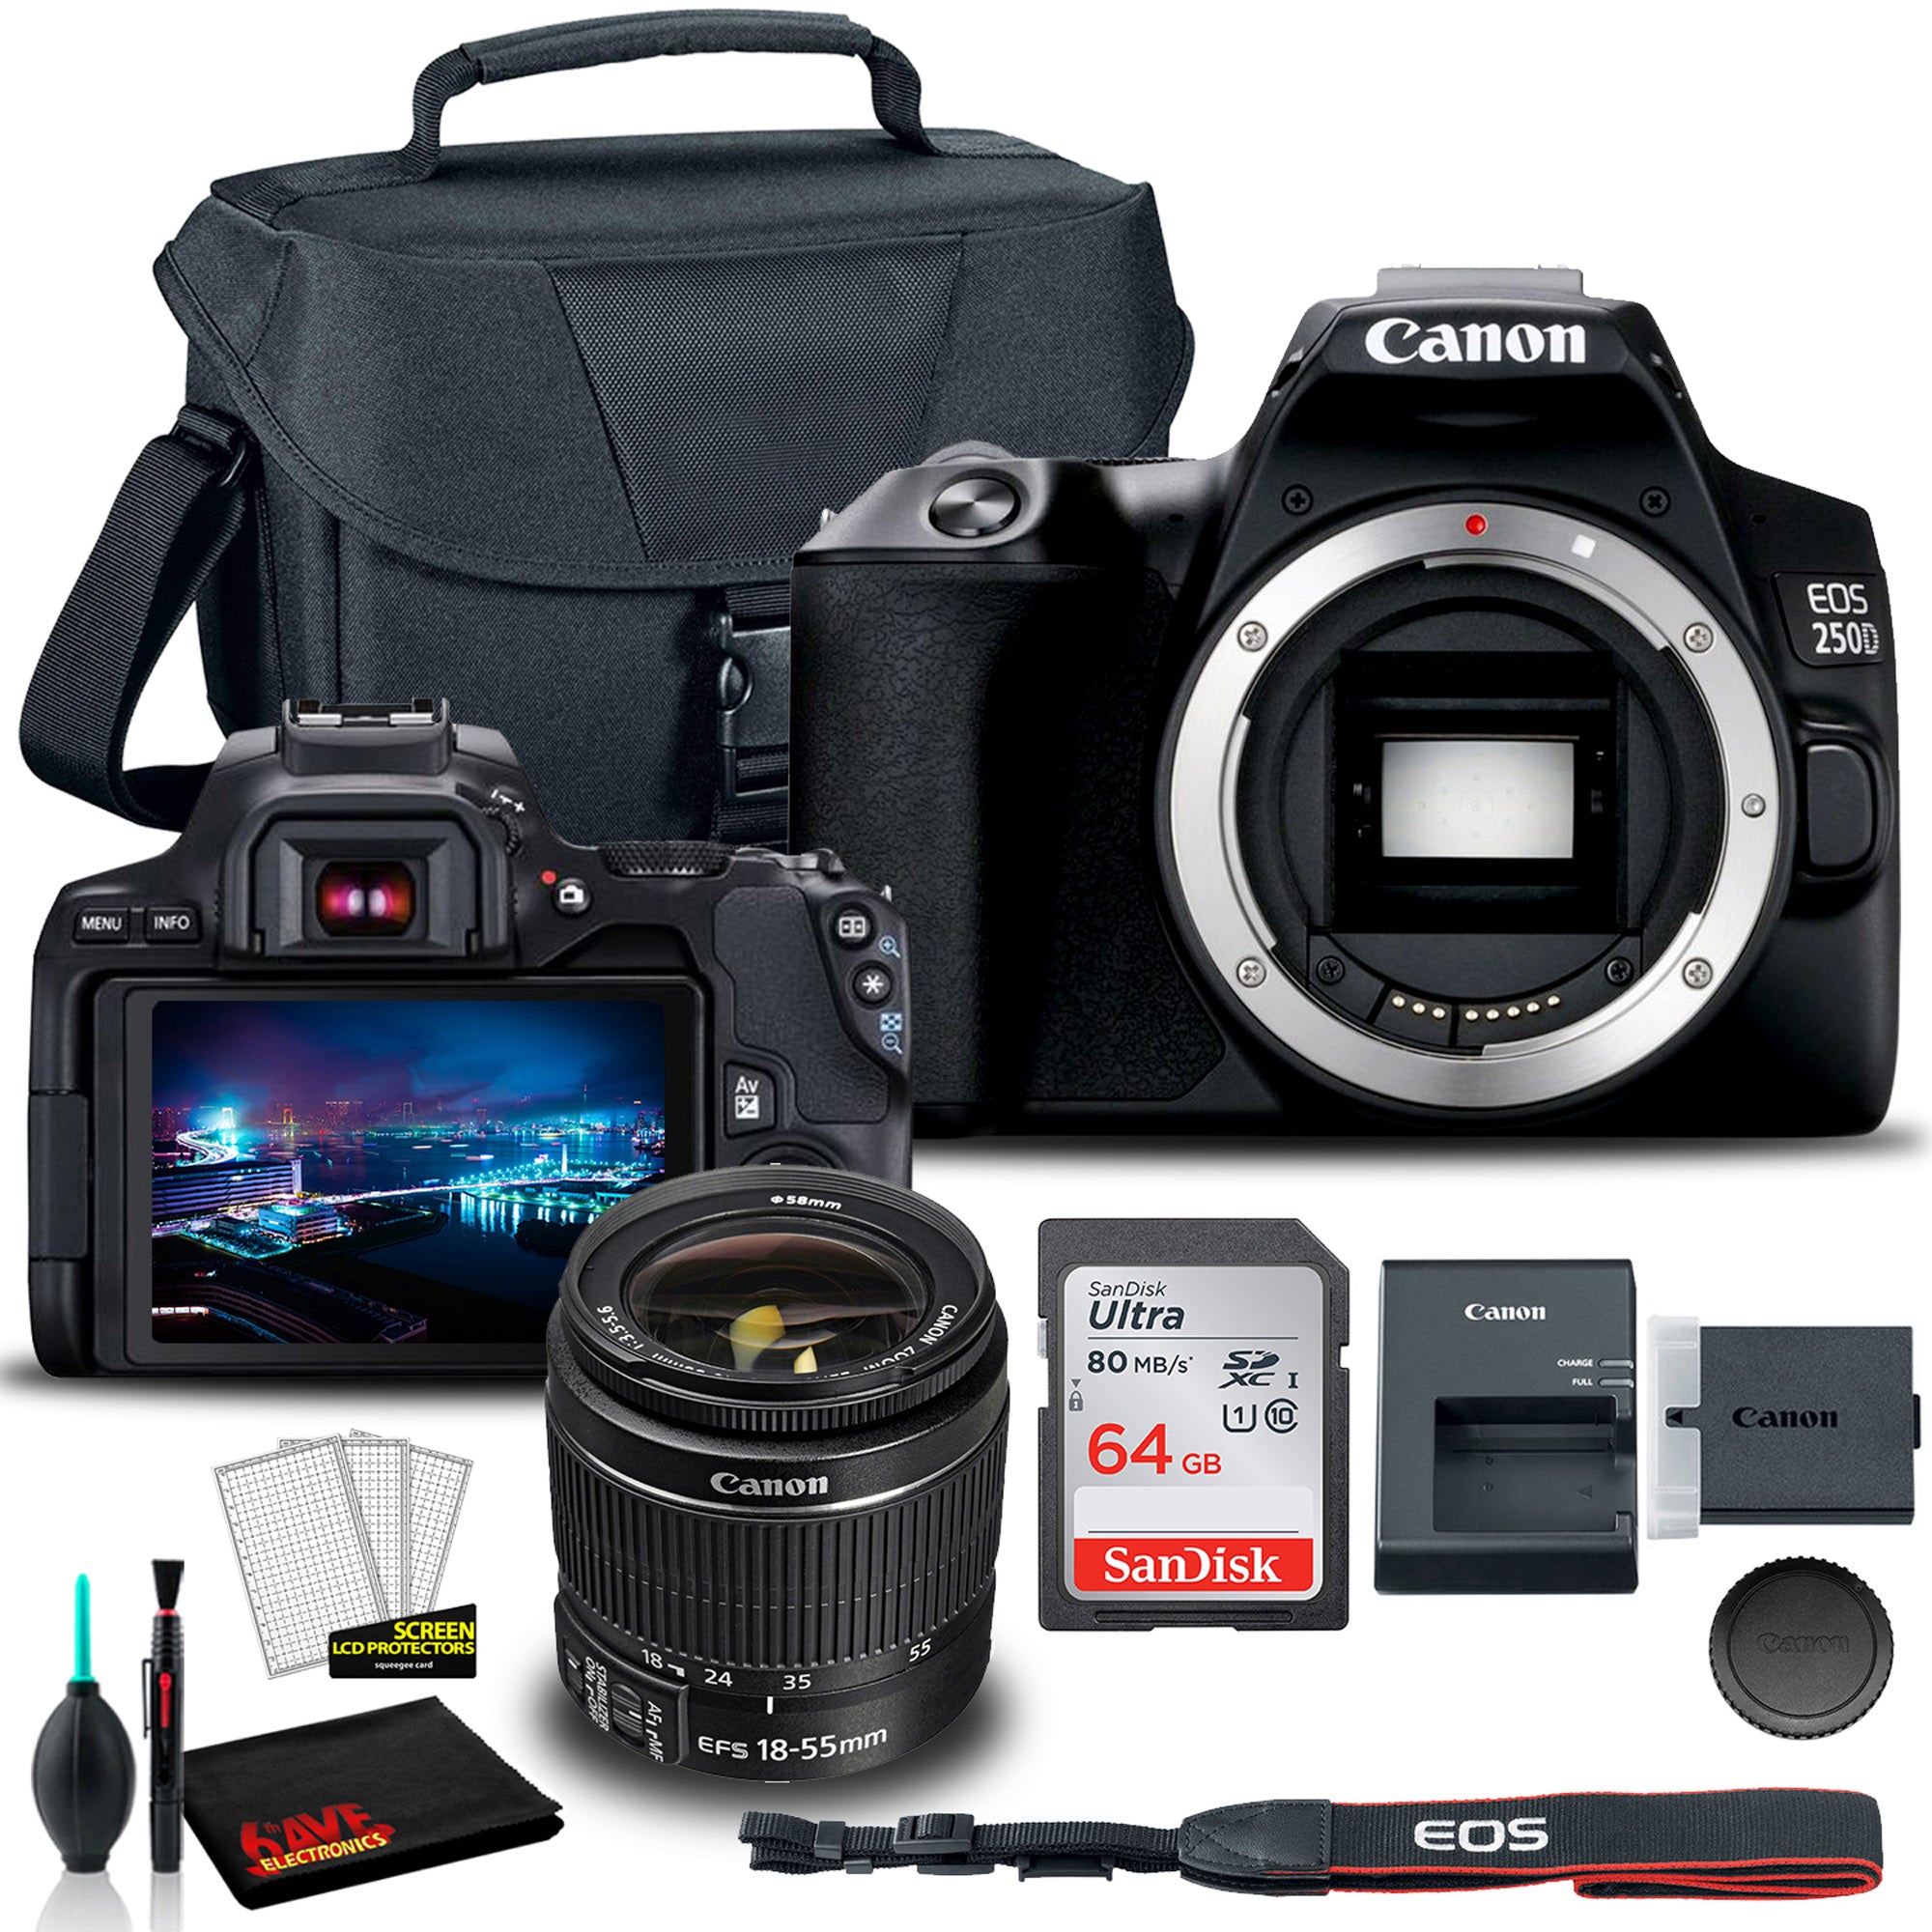 Canon EOS 250D DSLR Camera with 18-55mm Lens (Black) (3453C002) + EOS Bag + Sandisk Ultra 64GB Card + Cleaning Set And More (International Model) |